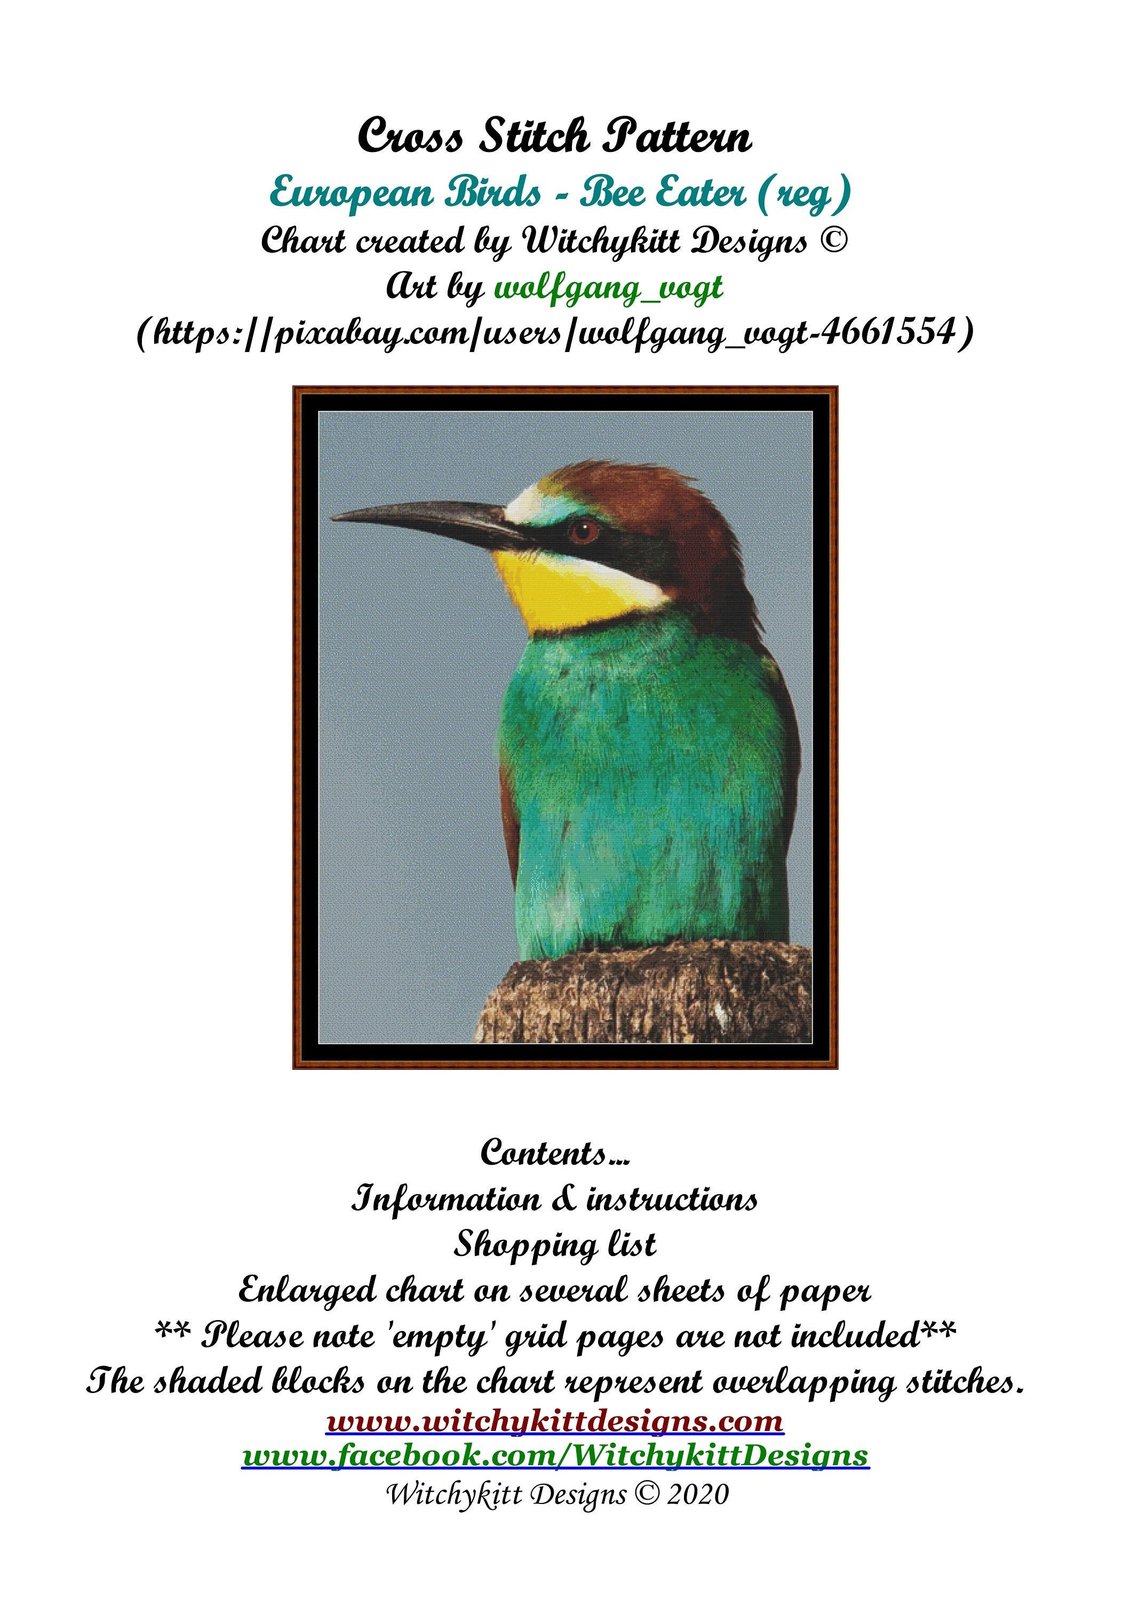 Primary image for European Birds - Bee Eater ~~ Cross Stitch Pattern